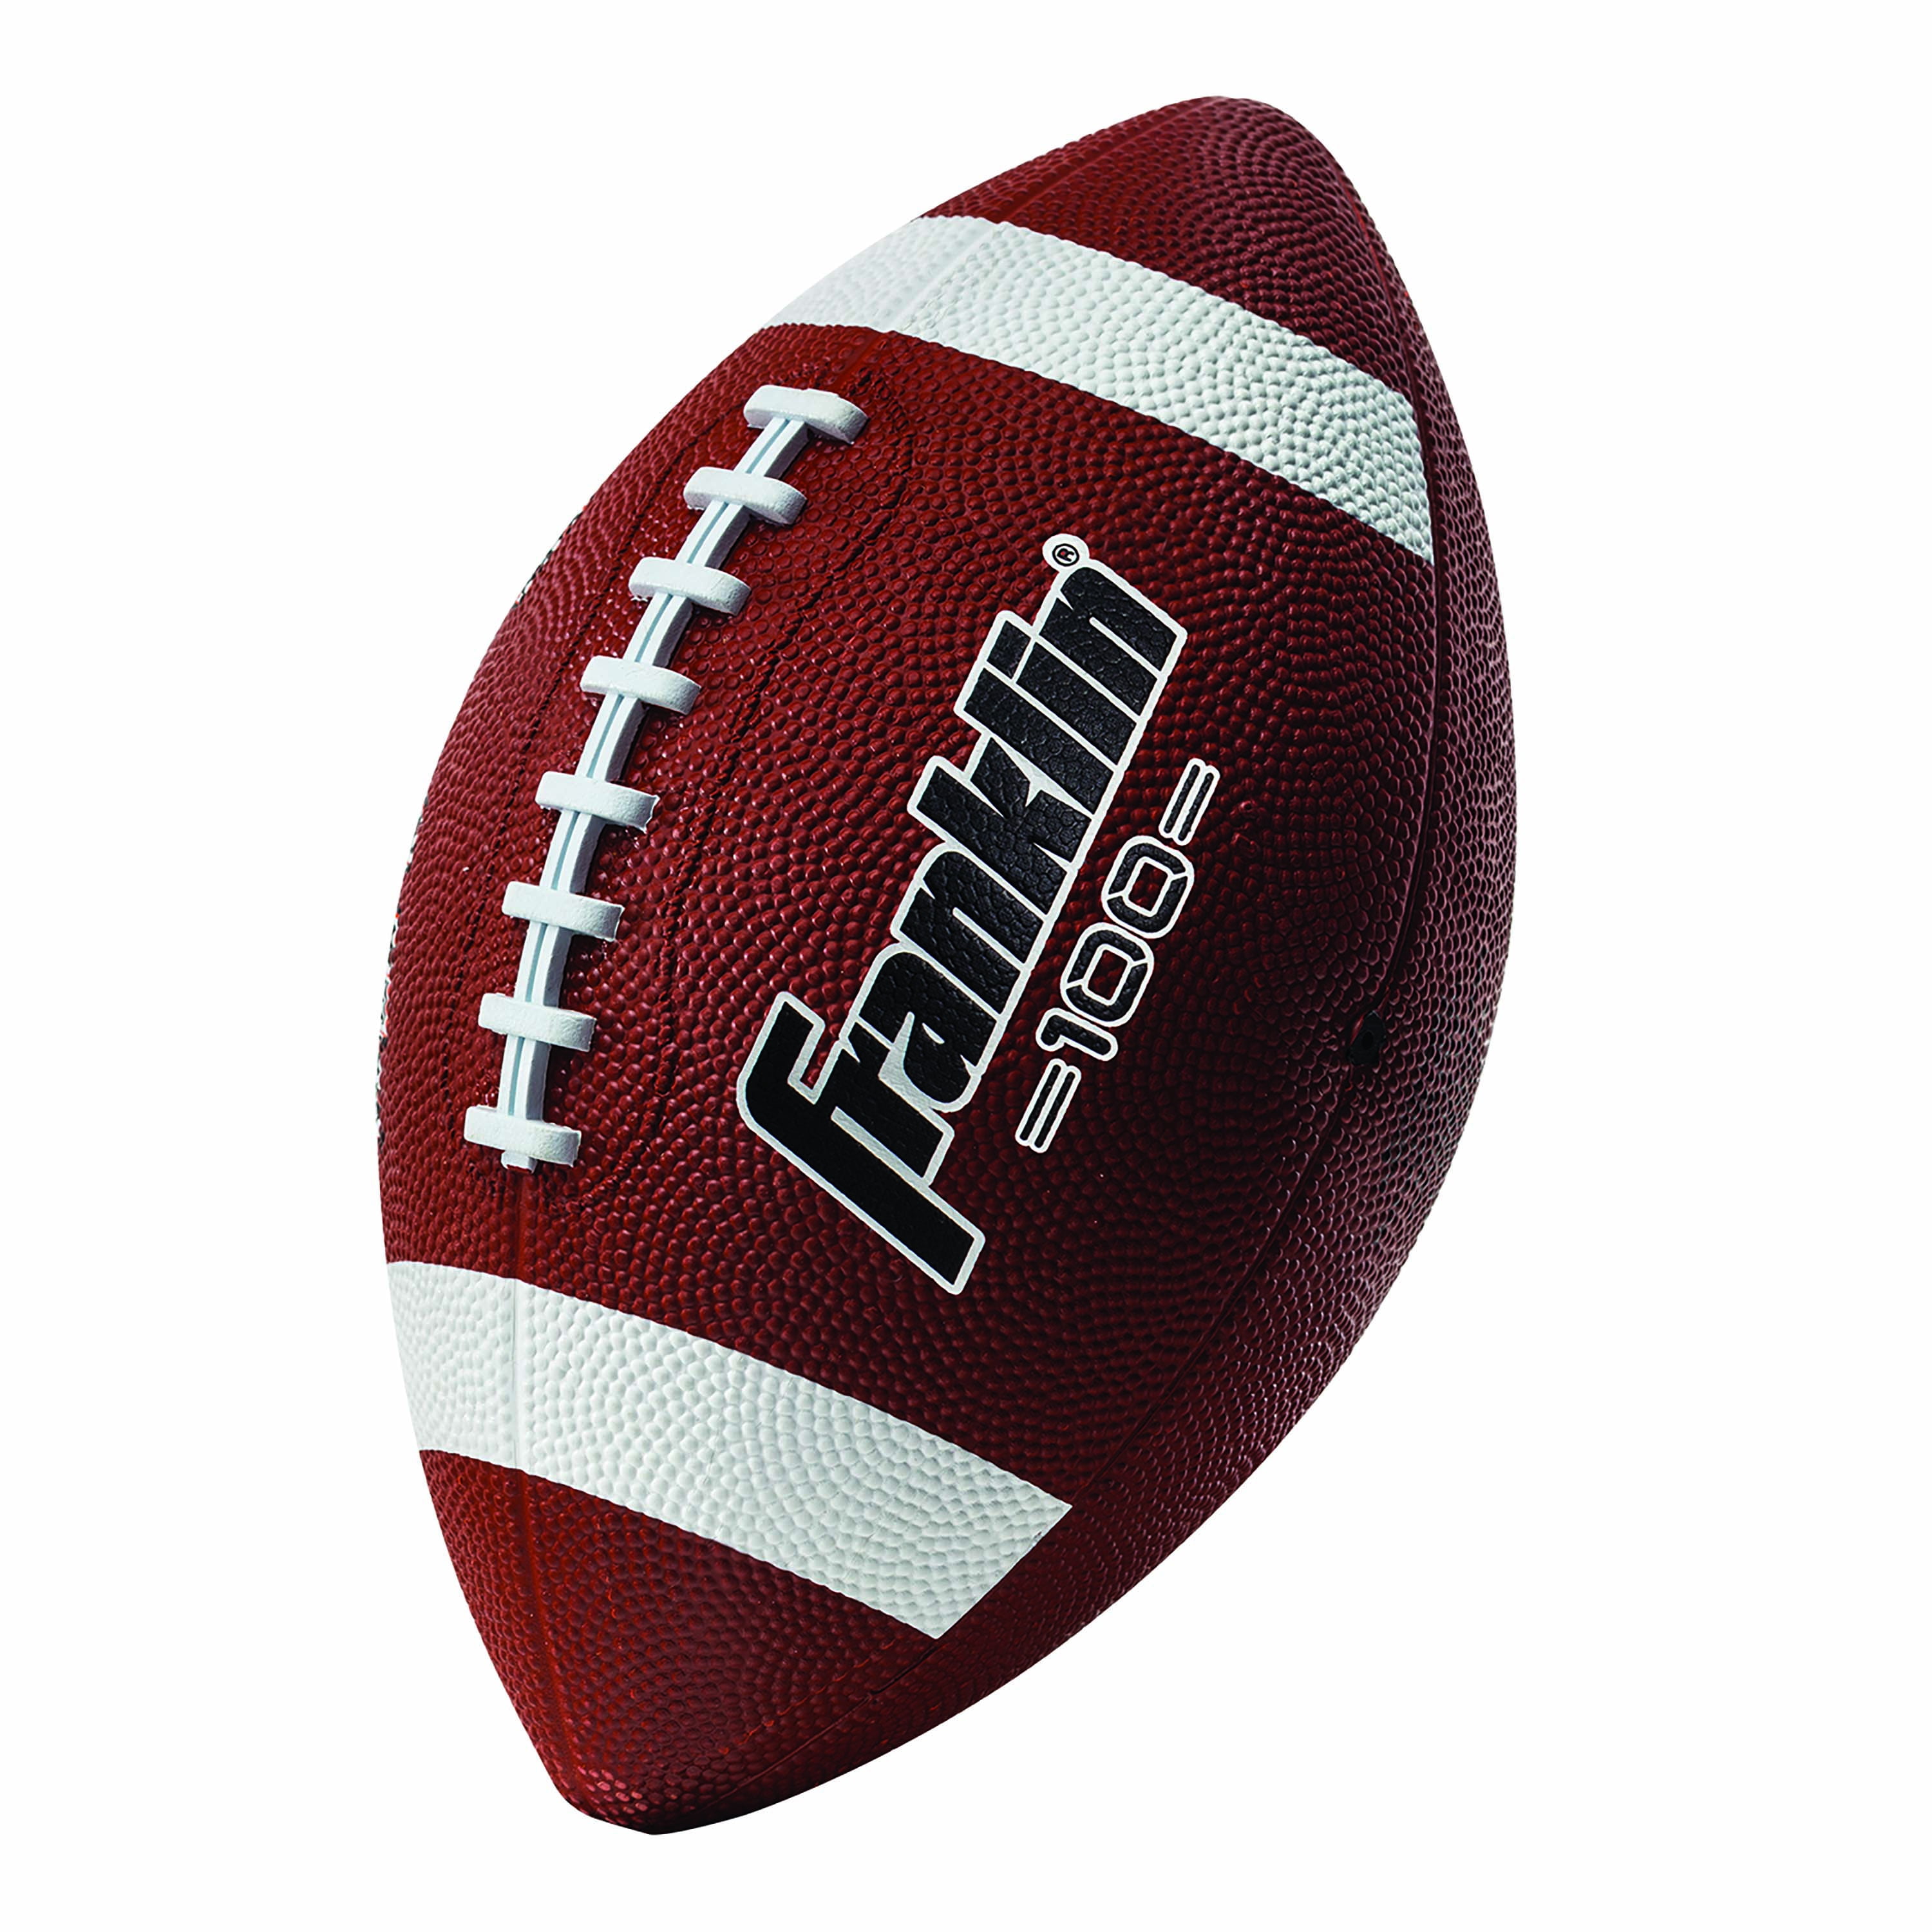 Franklin Sports Junior Size Rubber Football, Brown 